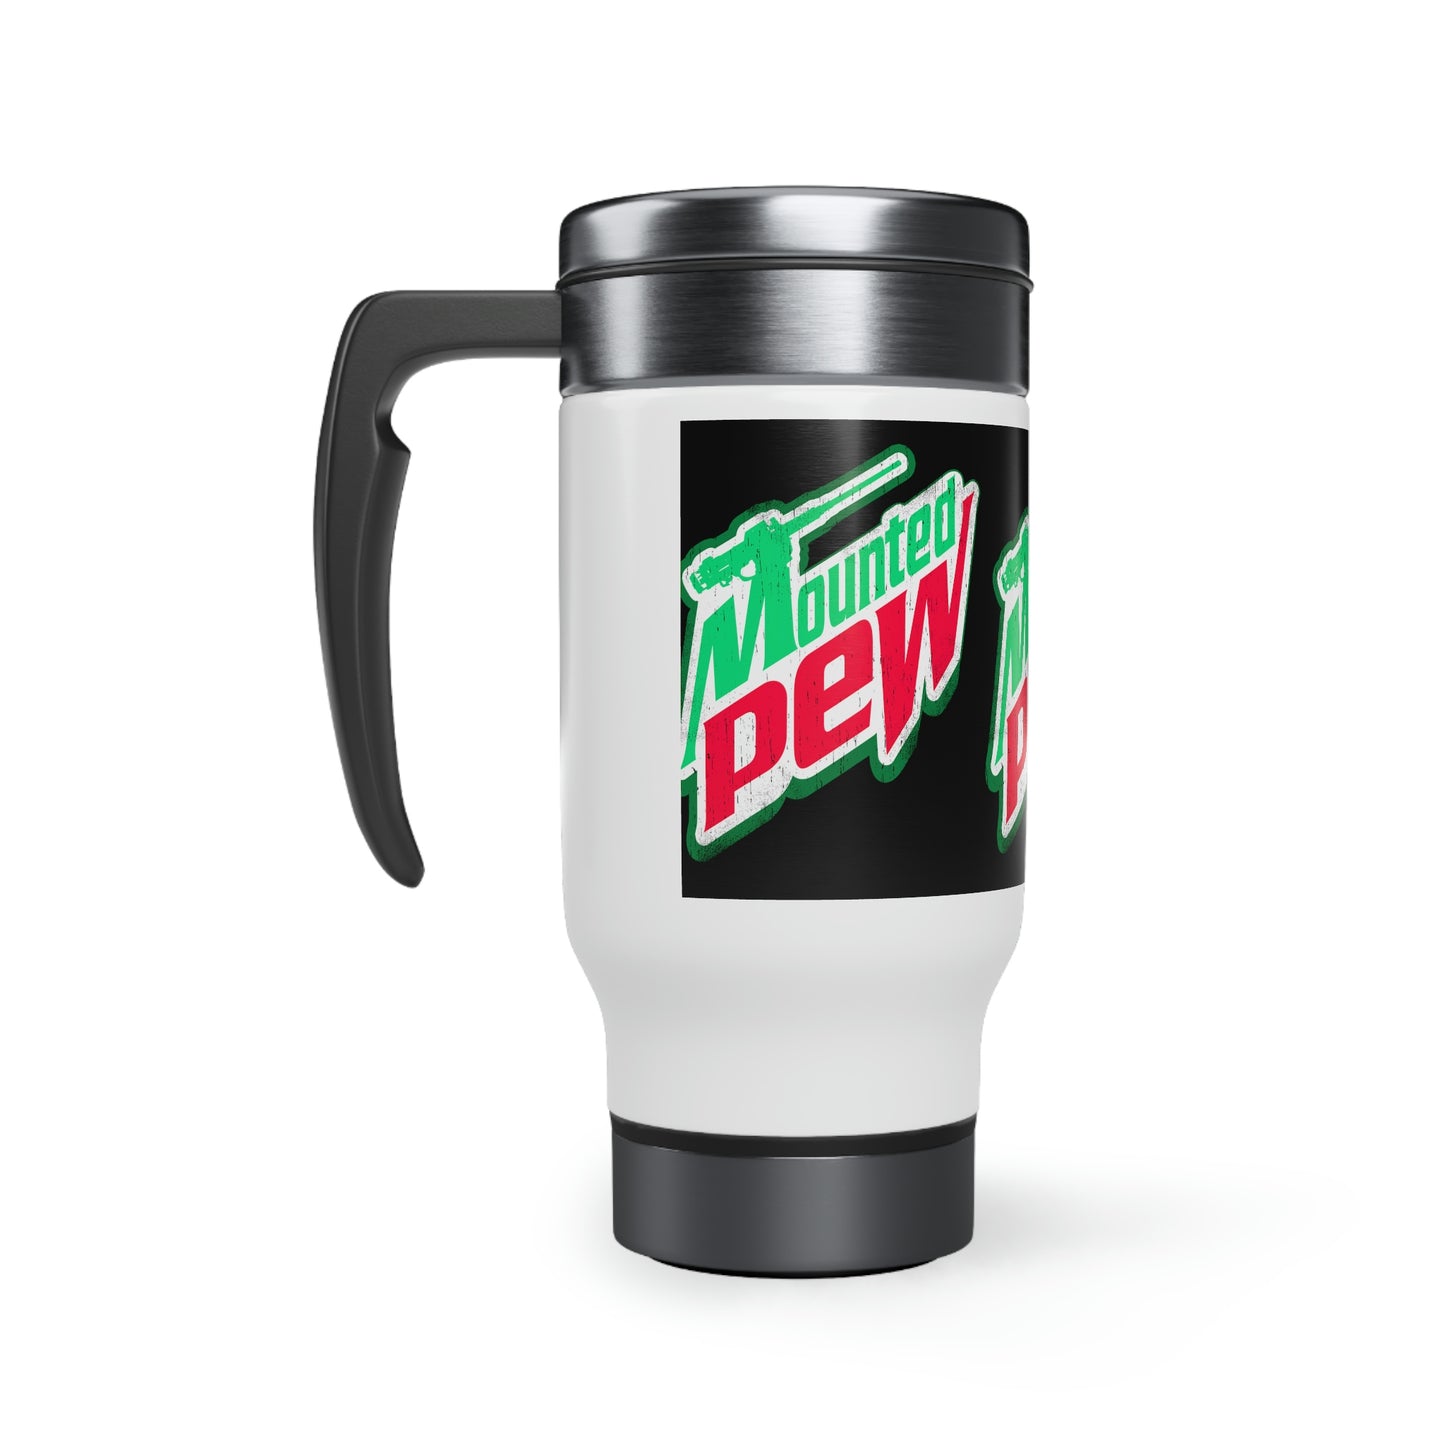 Mounted Pew Stainless Steel Travel Mug with Handle, 14oz